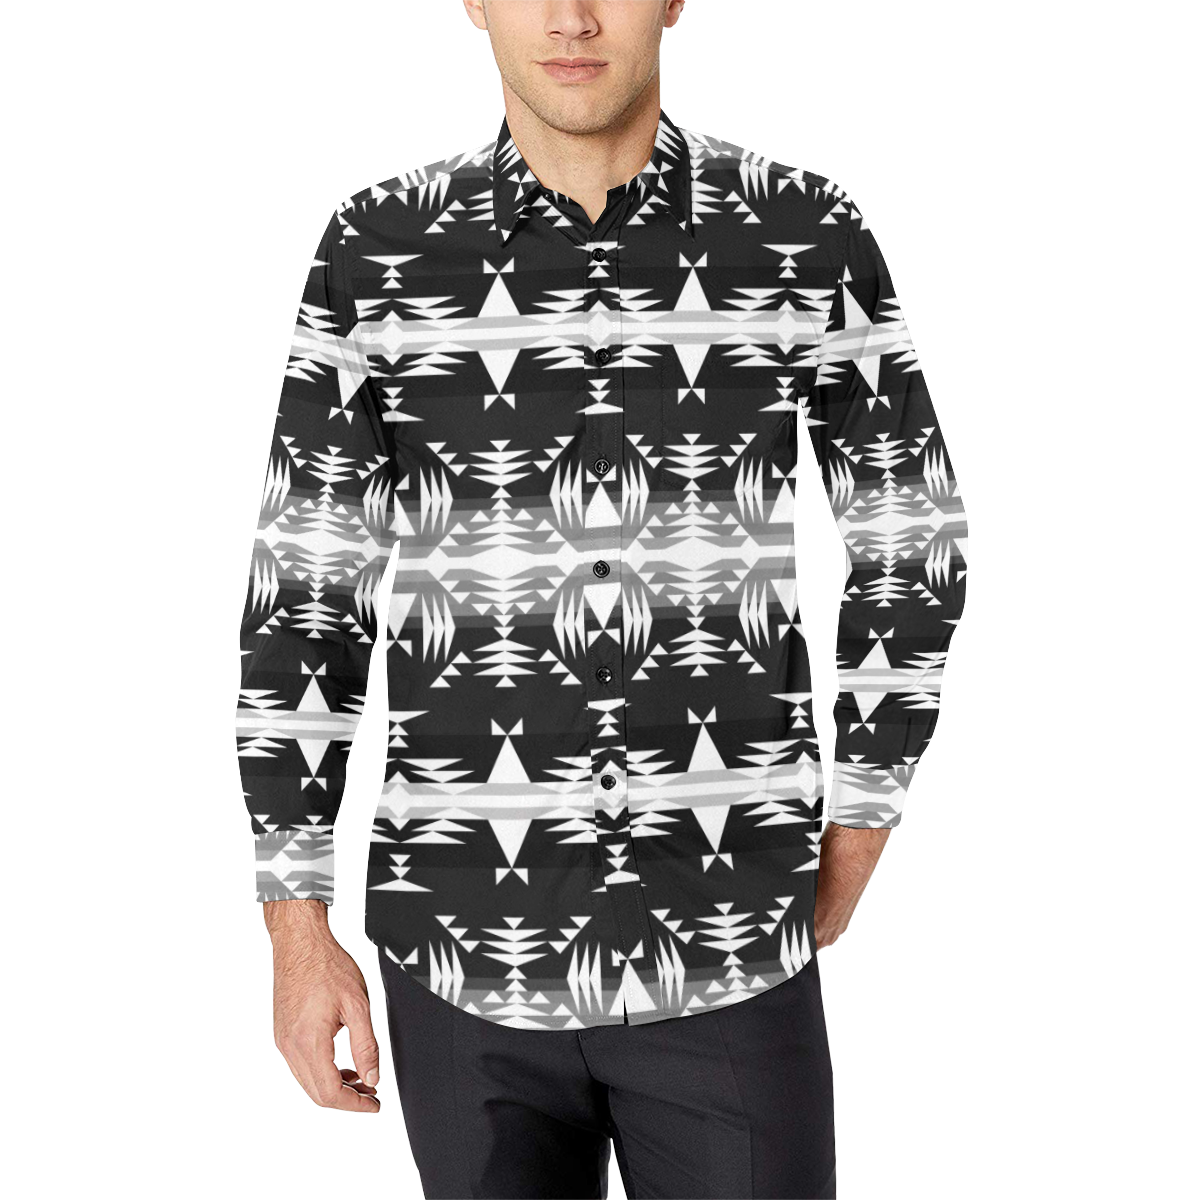 Between the Mountains Black and White Casual Dress Shirt